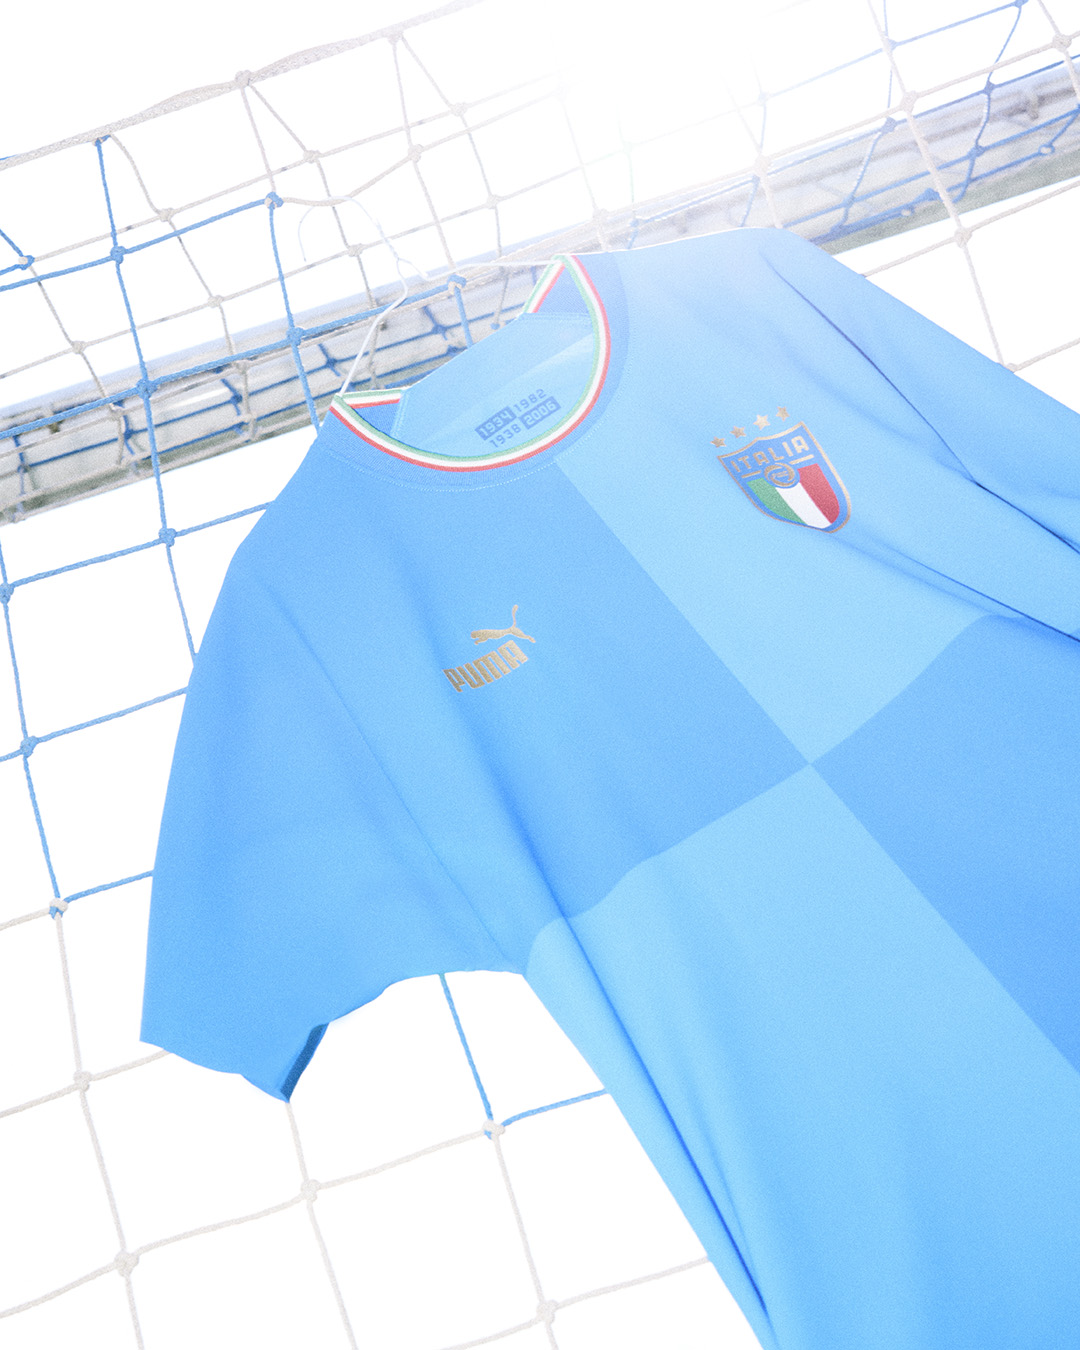 italy football shirts through the years